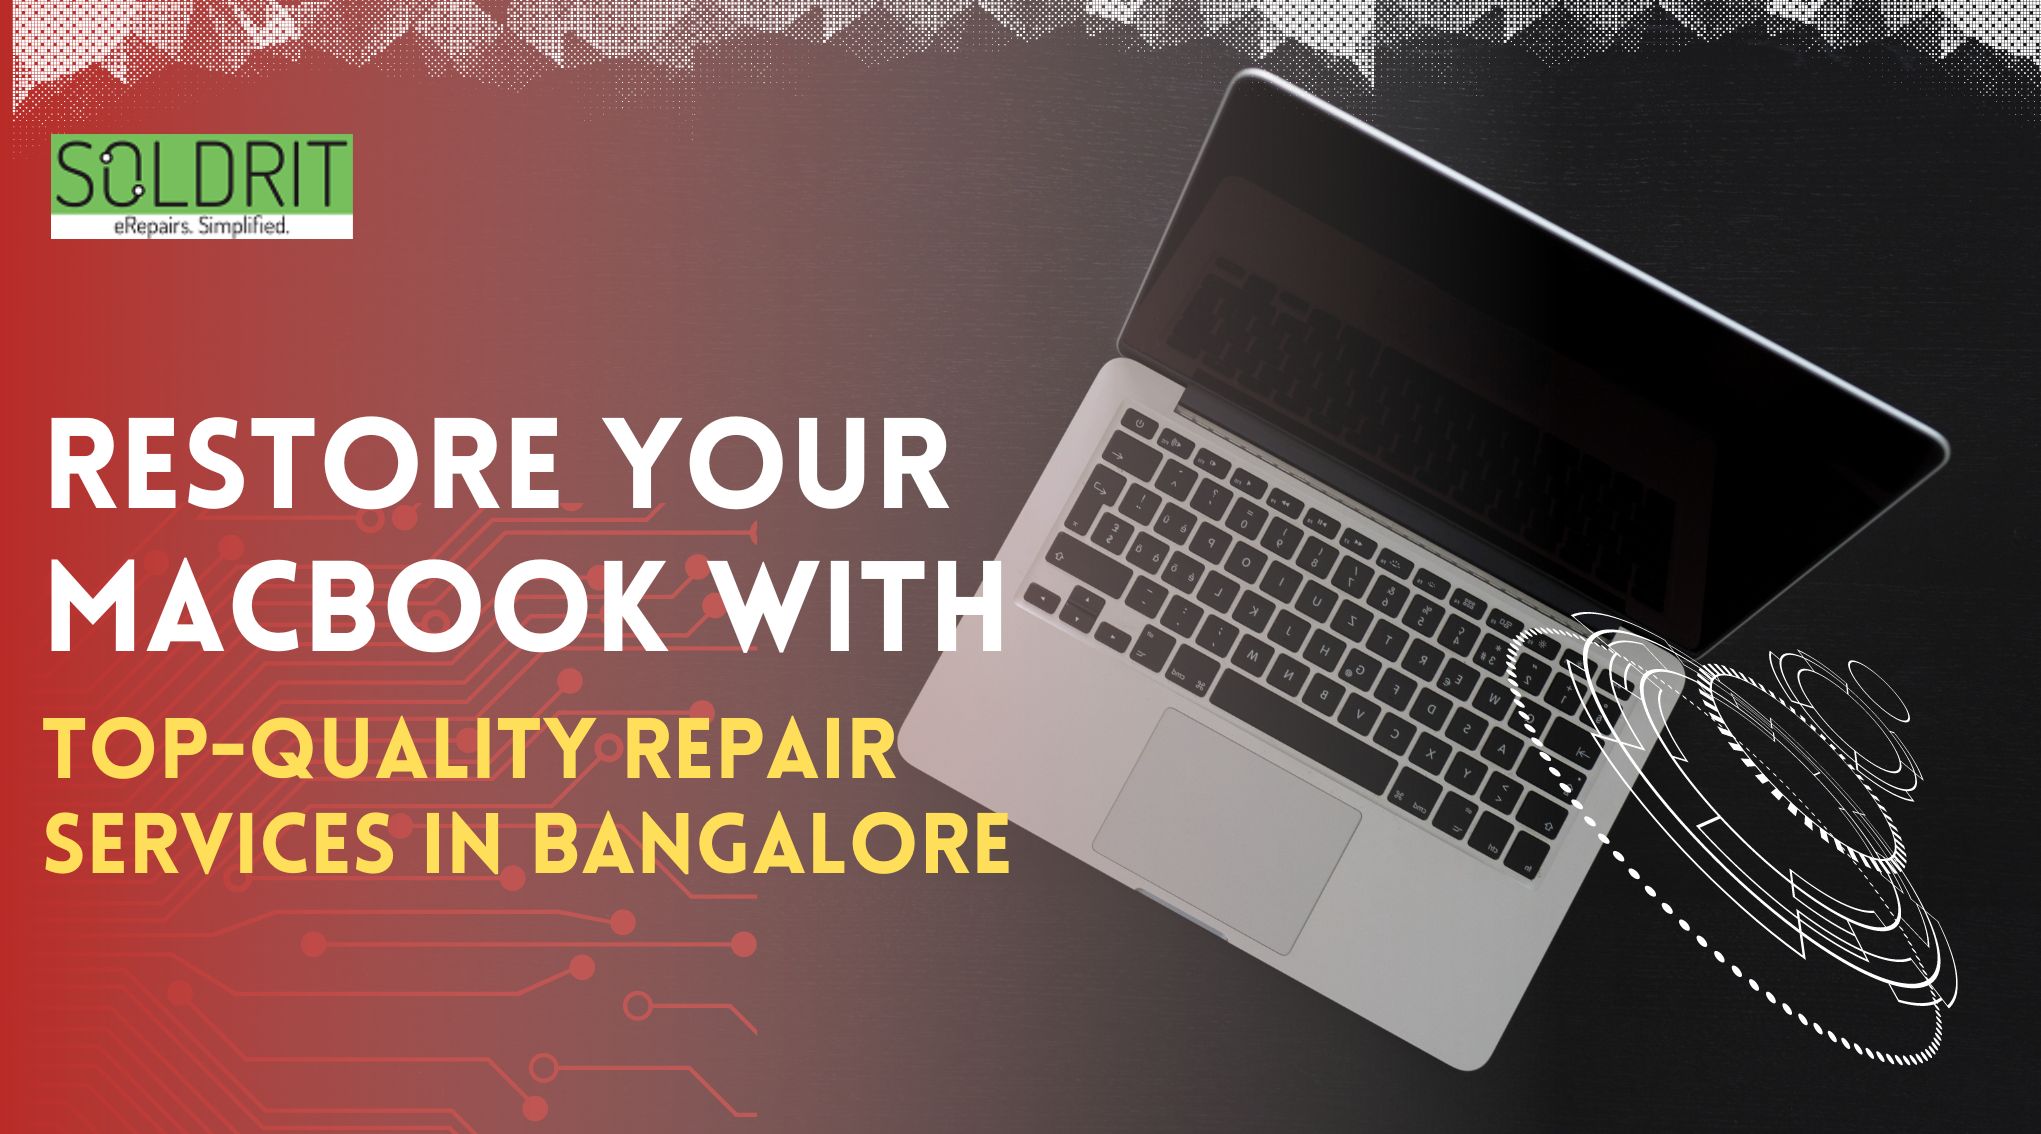 Restore Your MacBook with Top-Quality Repair Services in Bangalore